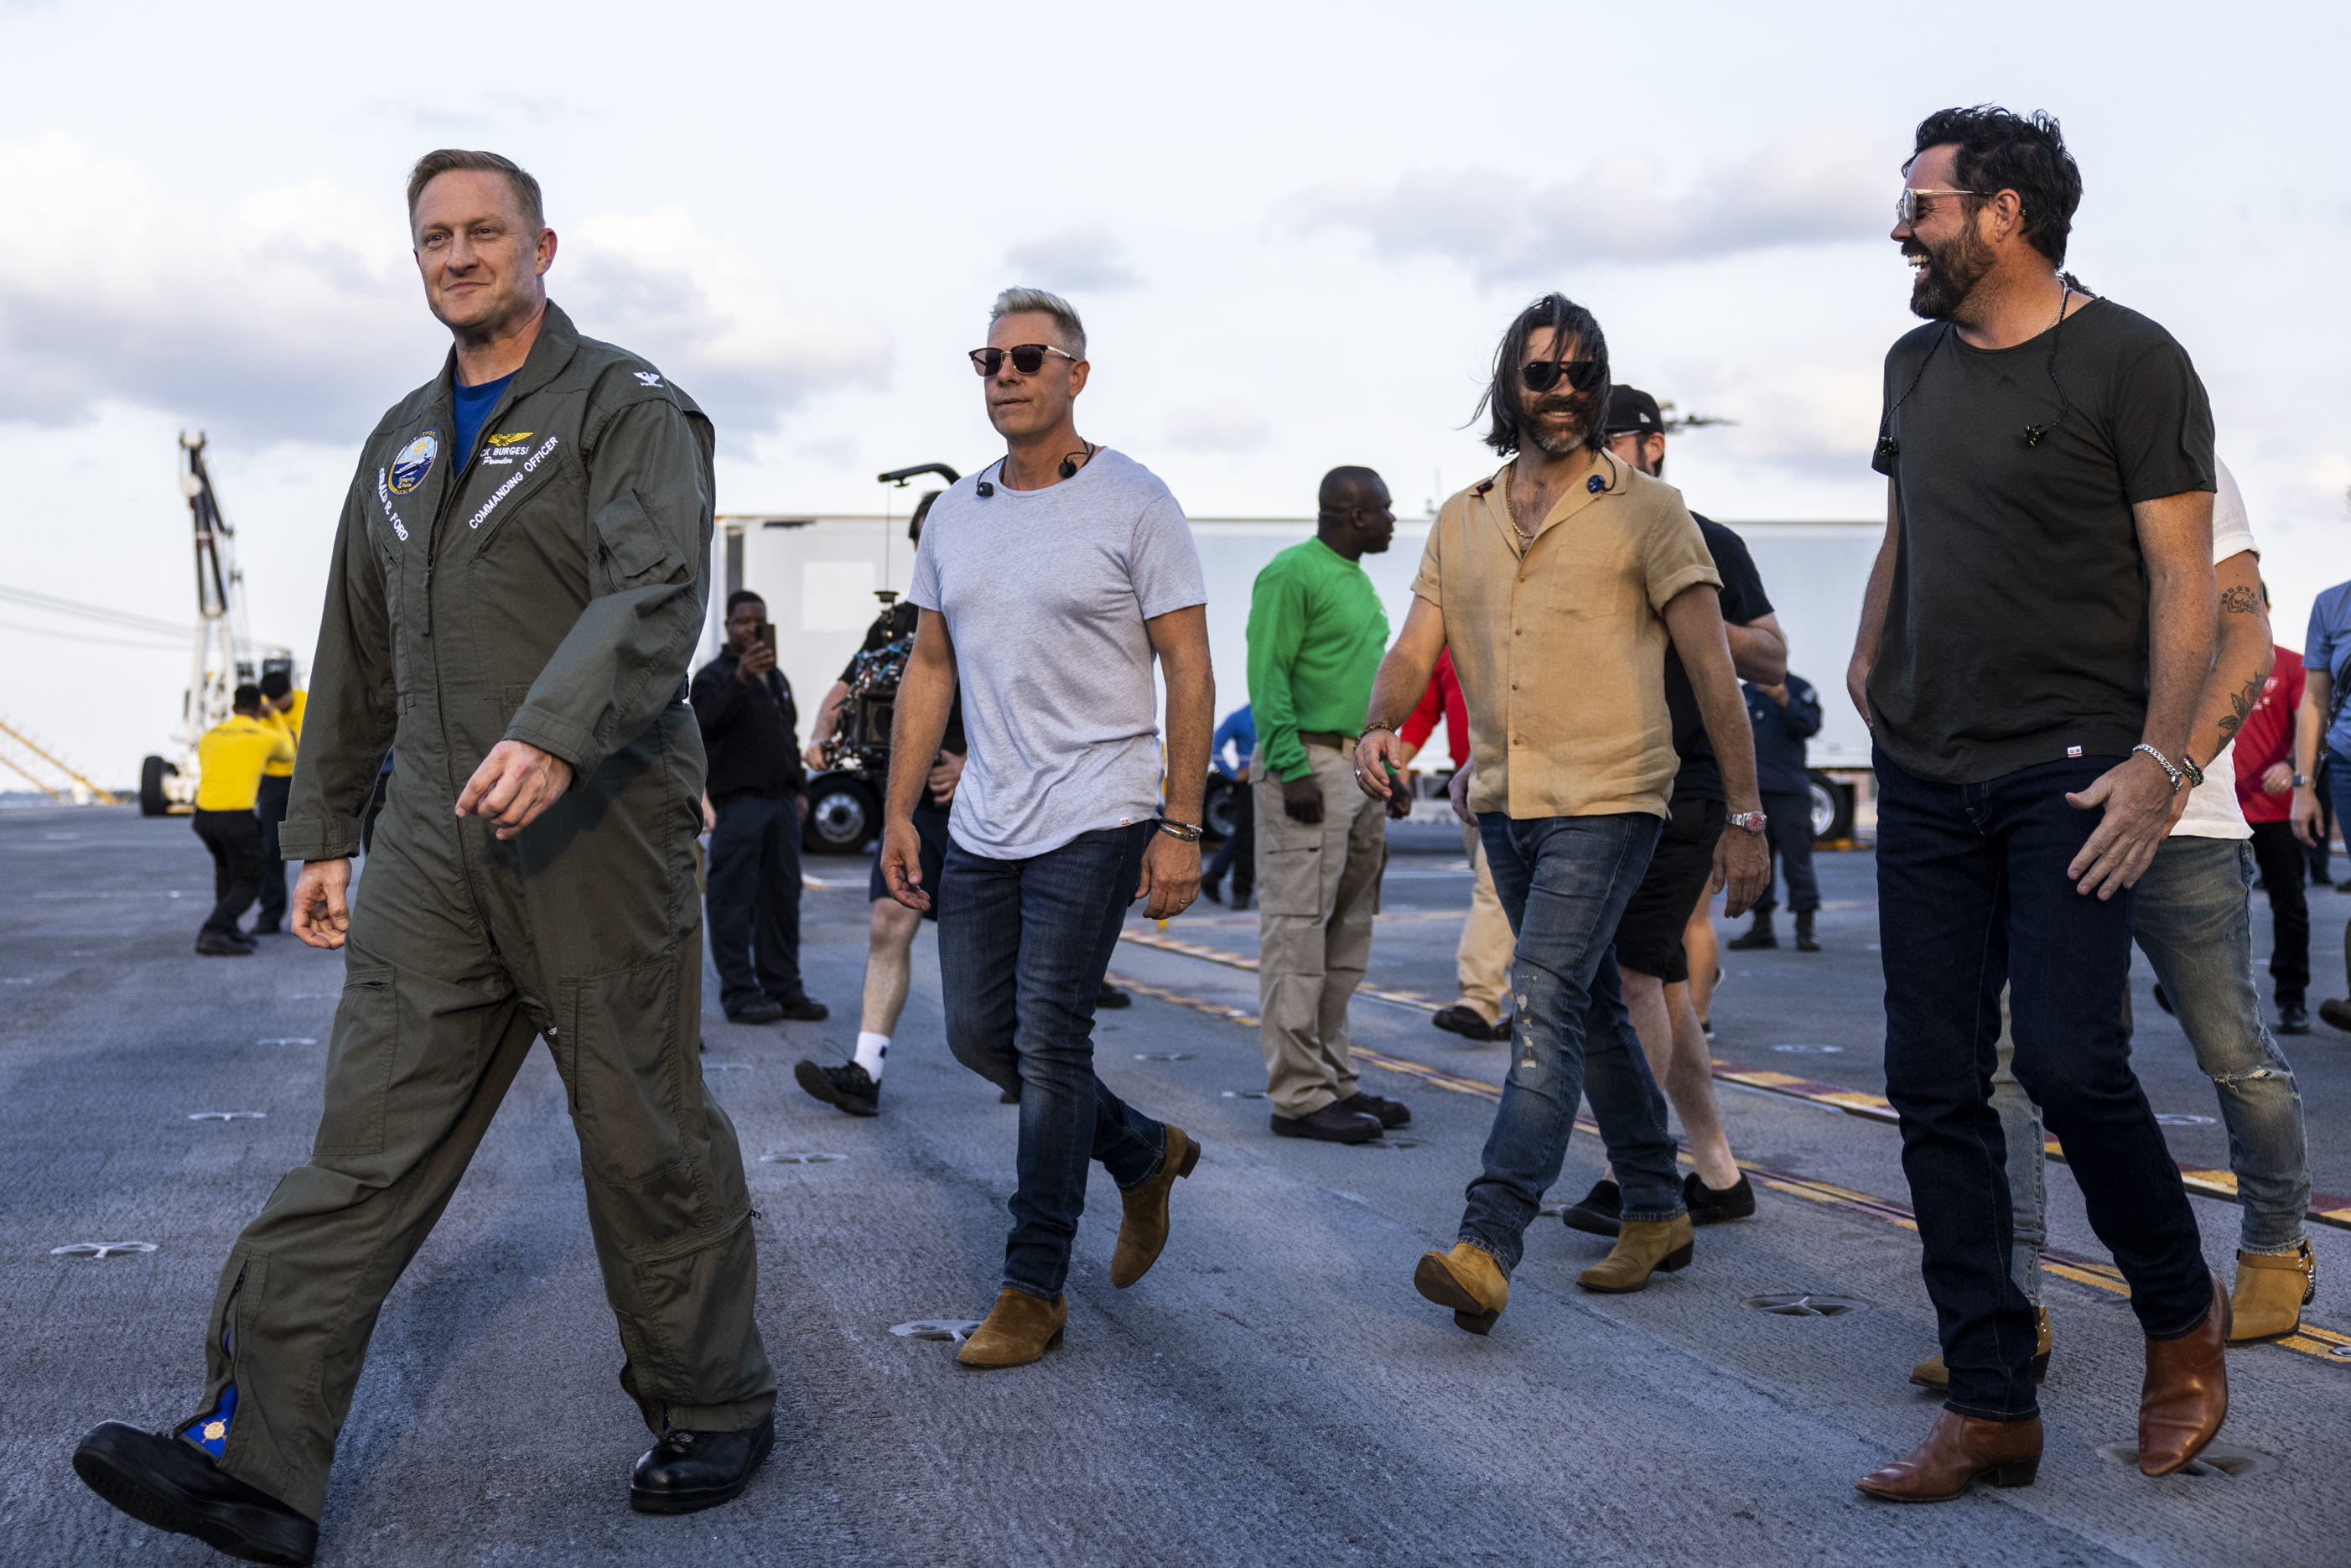 Country music band Old Dominion performs on USS Gerald Ford, films music video